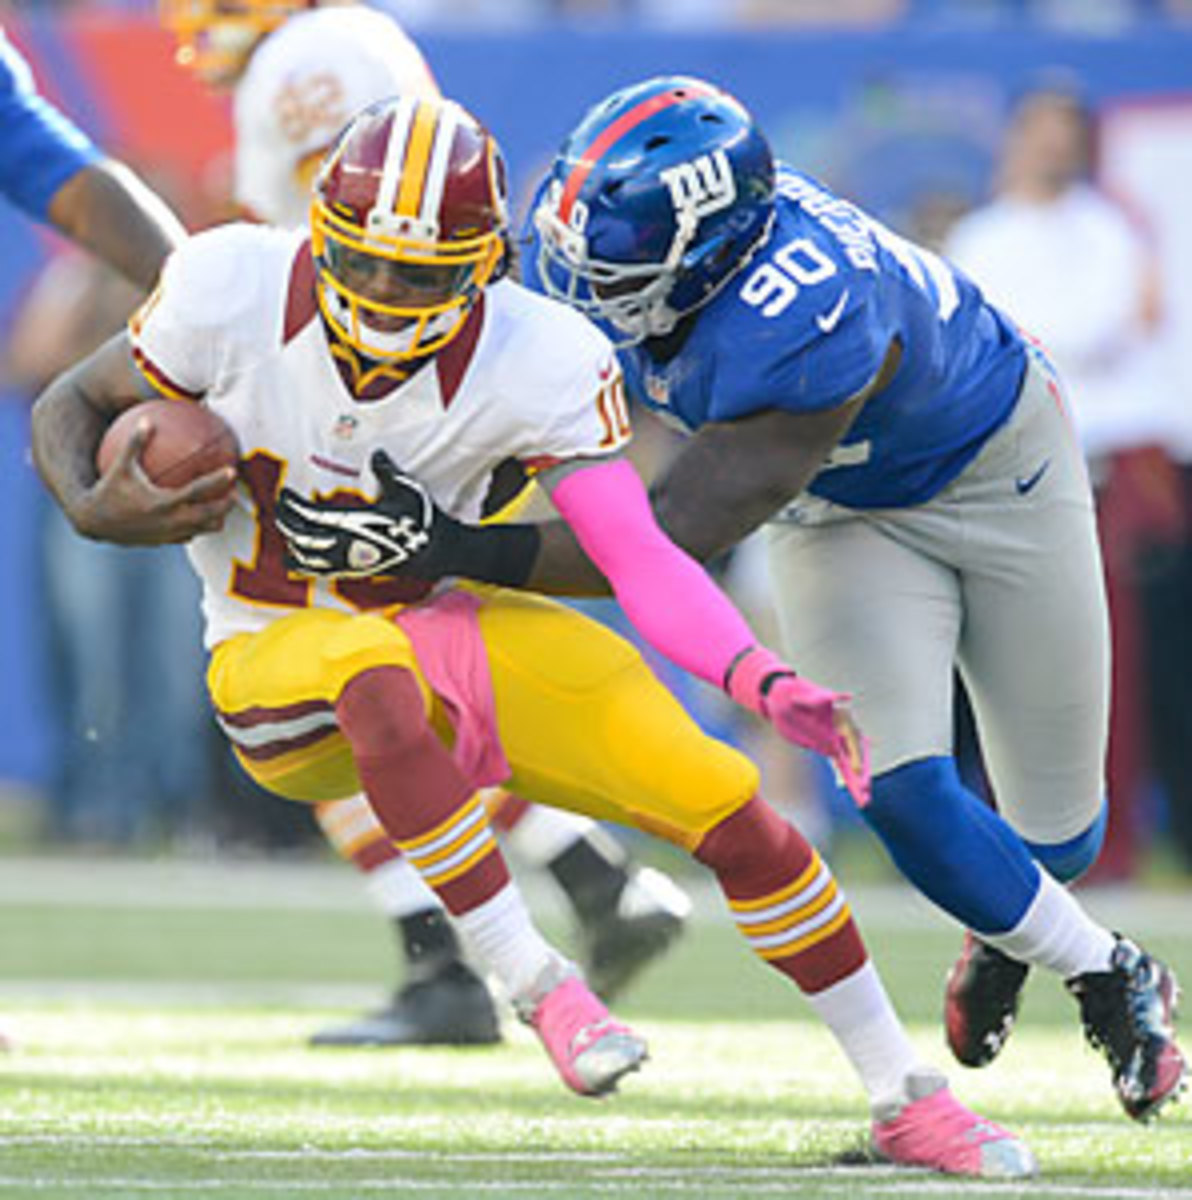 Robert Griffin III's ability to elude the Giants' defense Monday may hold the key to what team wins the NFC East. (Rich Kane/Icon SMI)